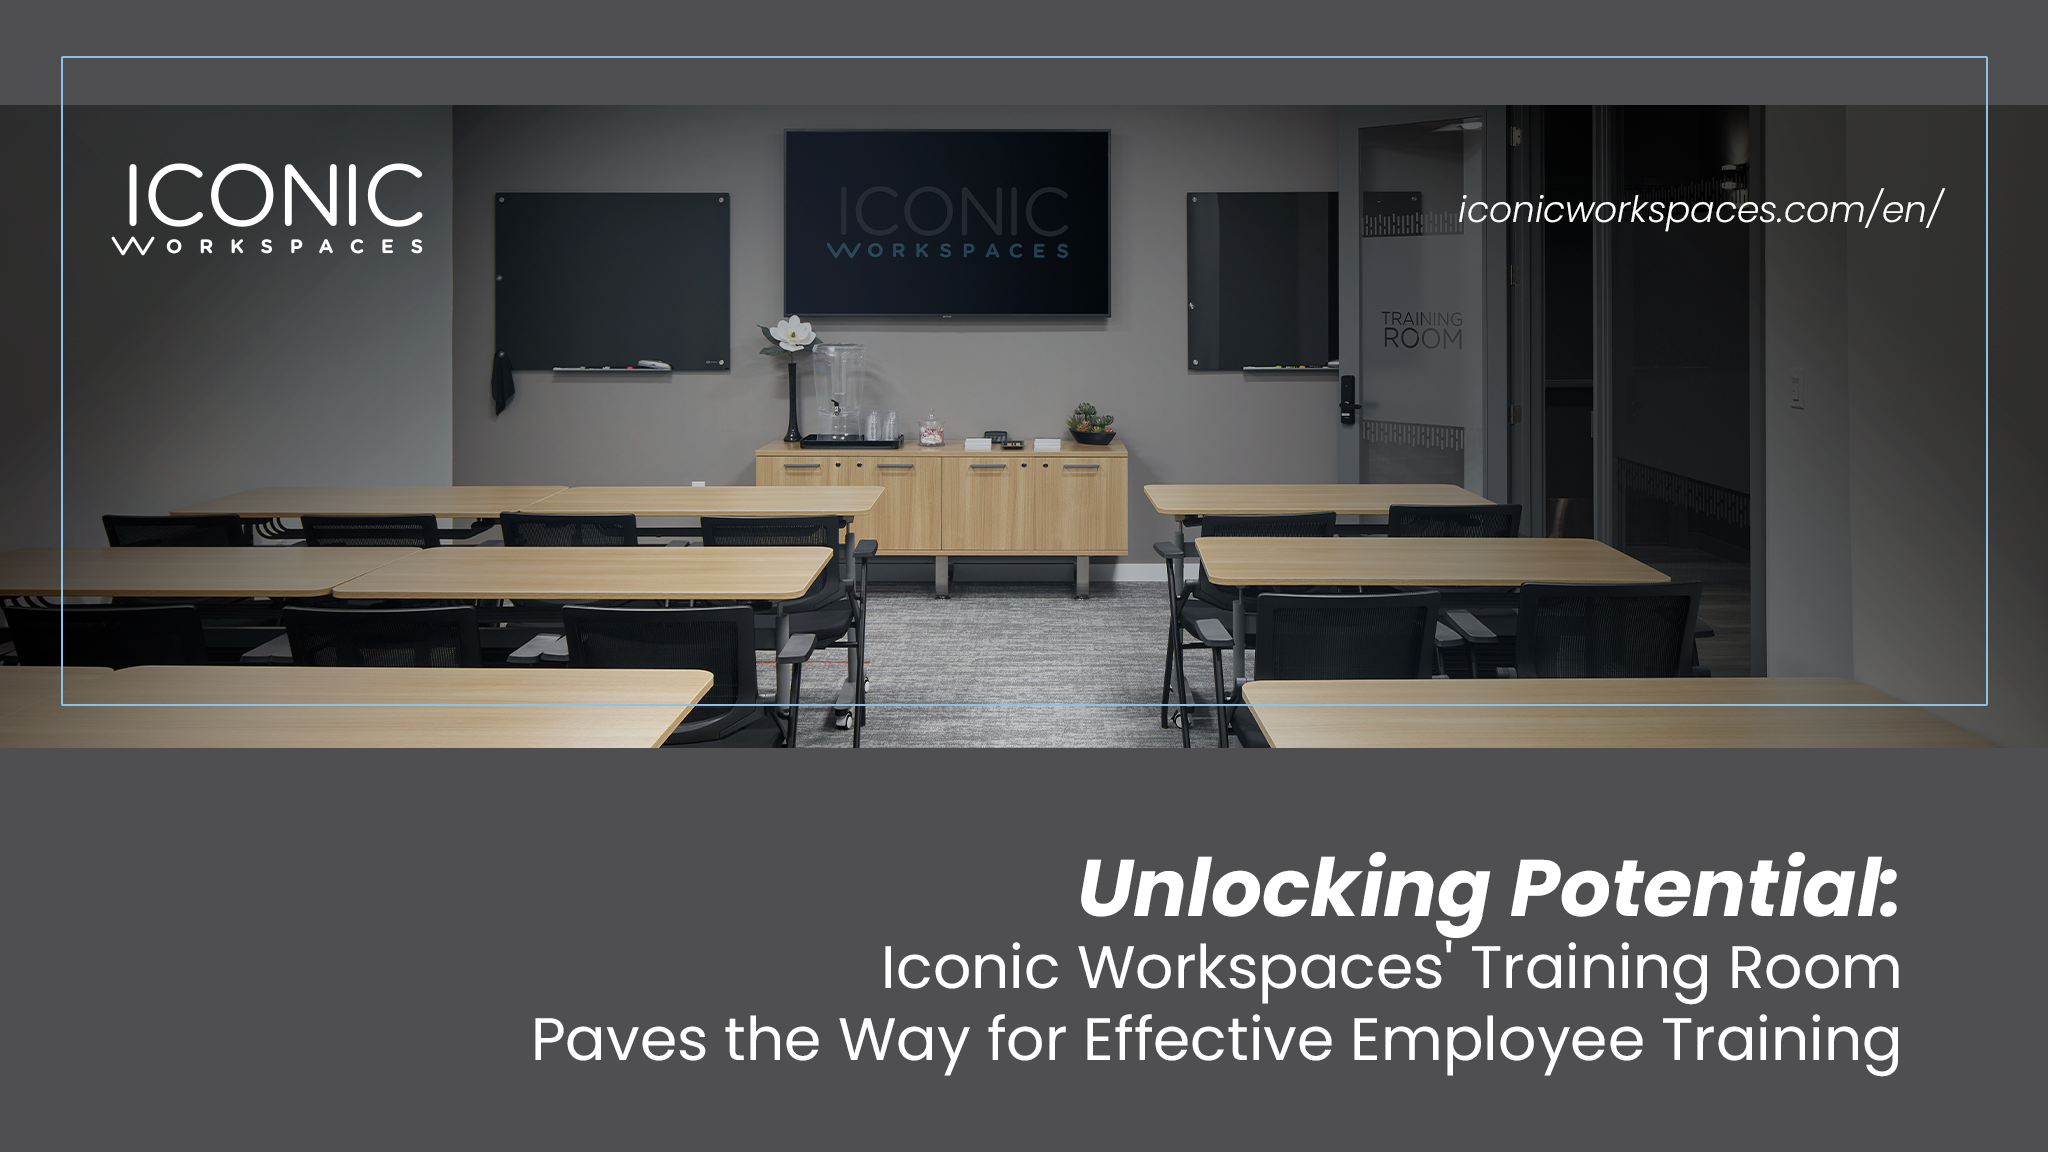 Unlocking Potential: Iconic Workspaces' Training Room Paves the Way for Effective Employee Training